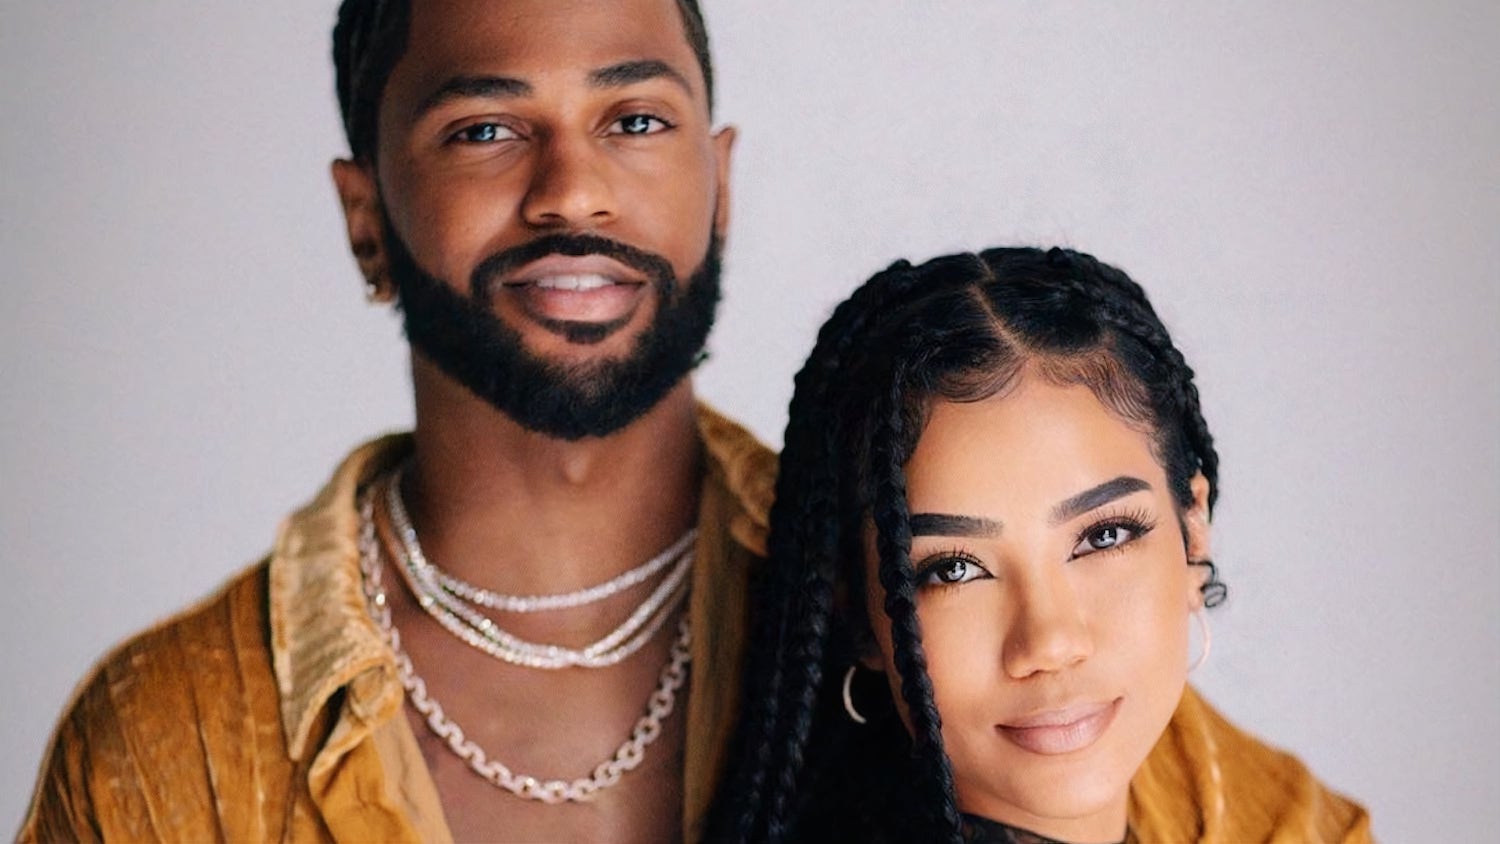 Big Sean and Jhené Aiko Reveal They're Expecting A Baby Boy